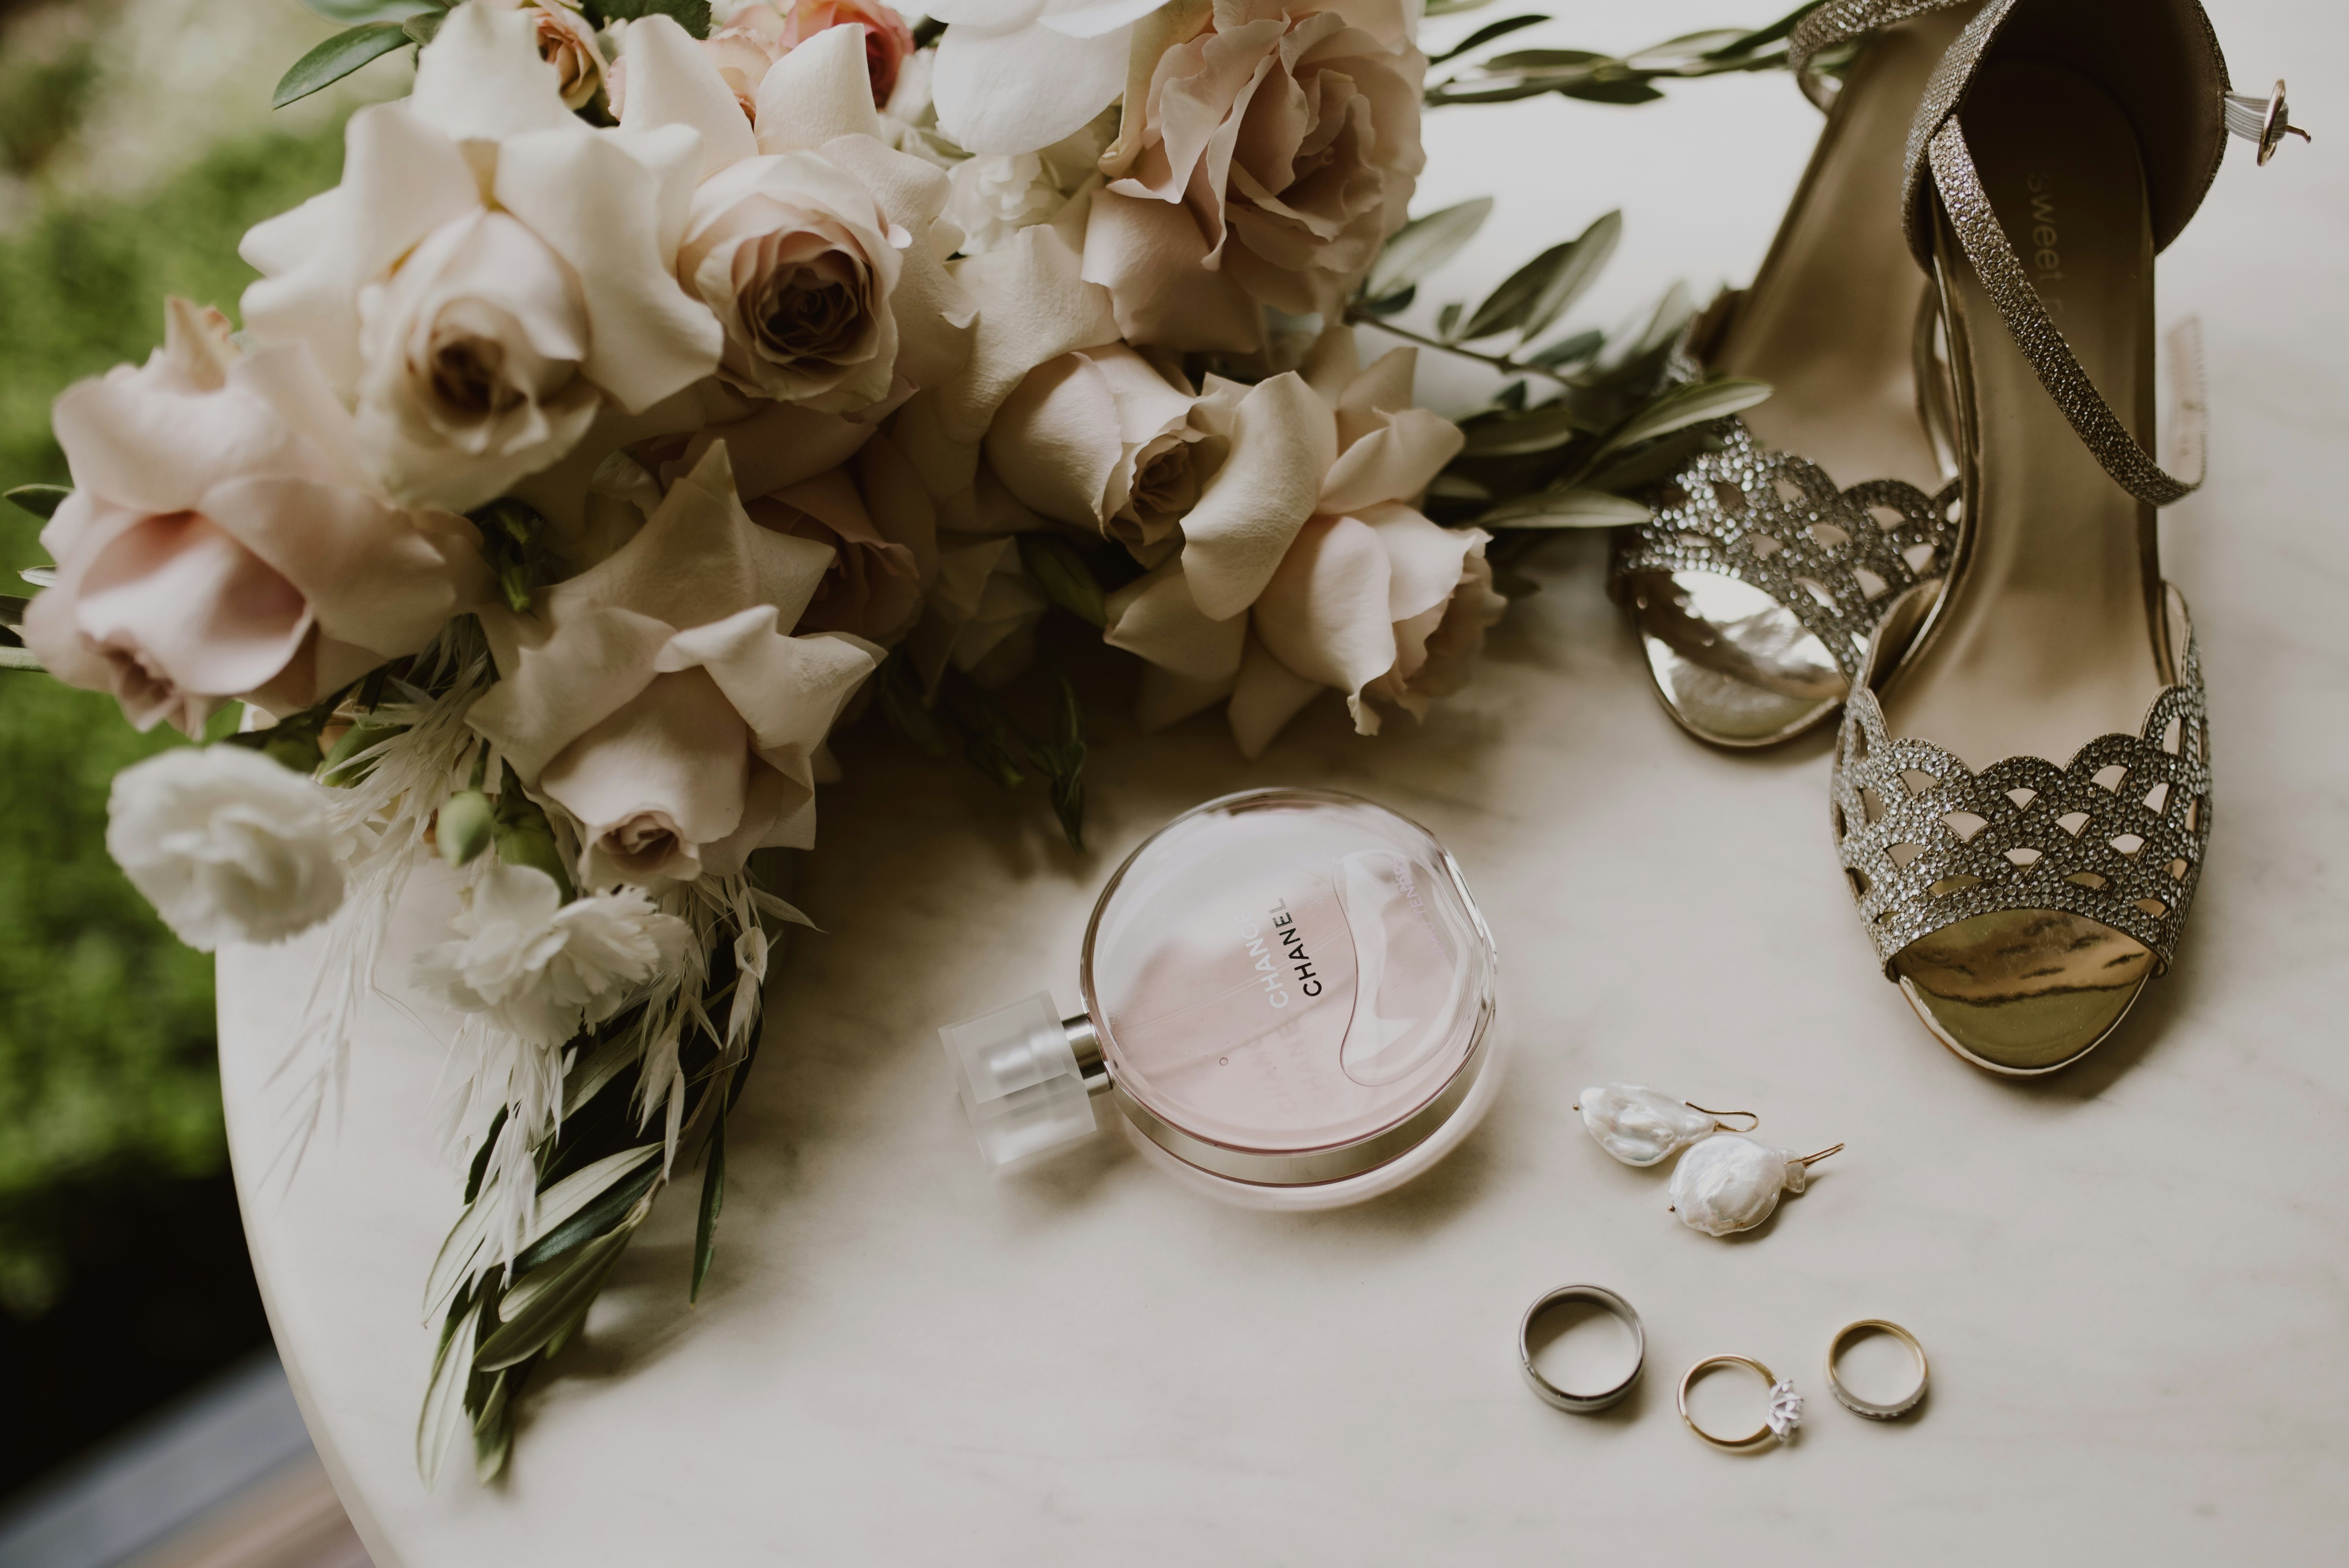 Shoes, perfume, wedding rings, bouquet arranged on a table 